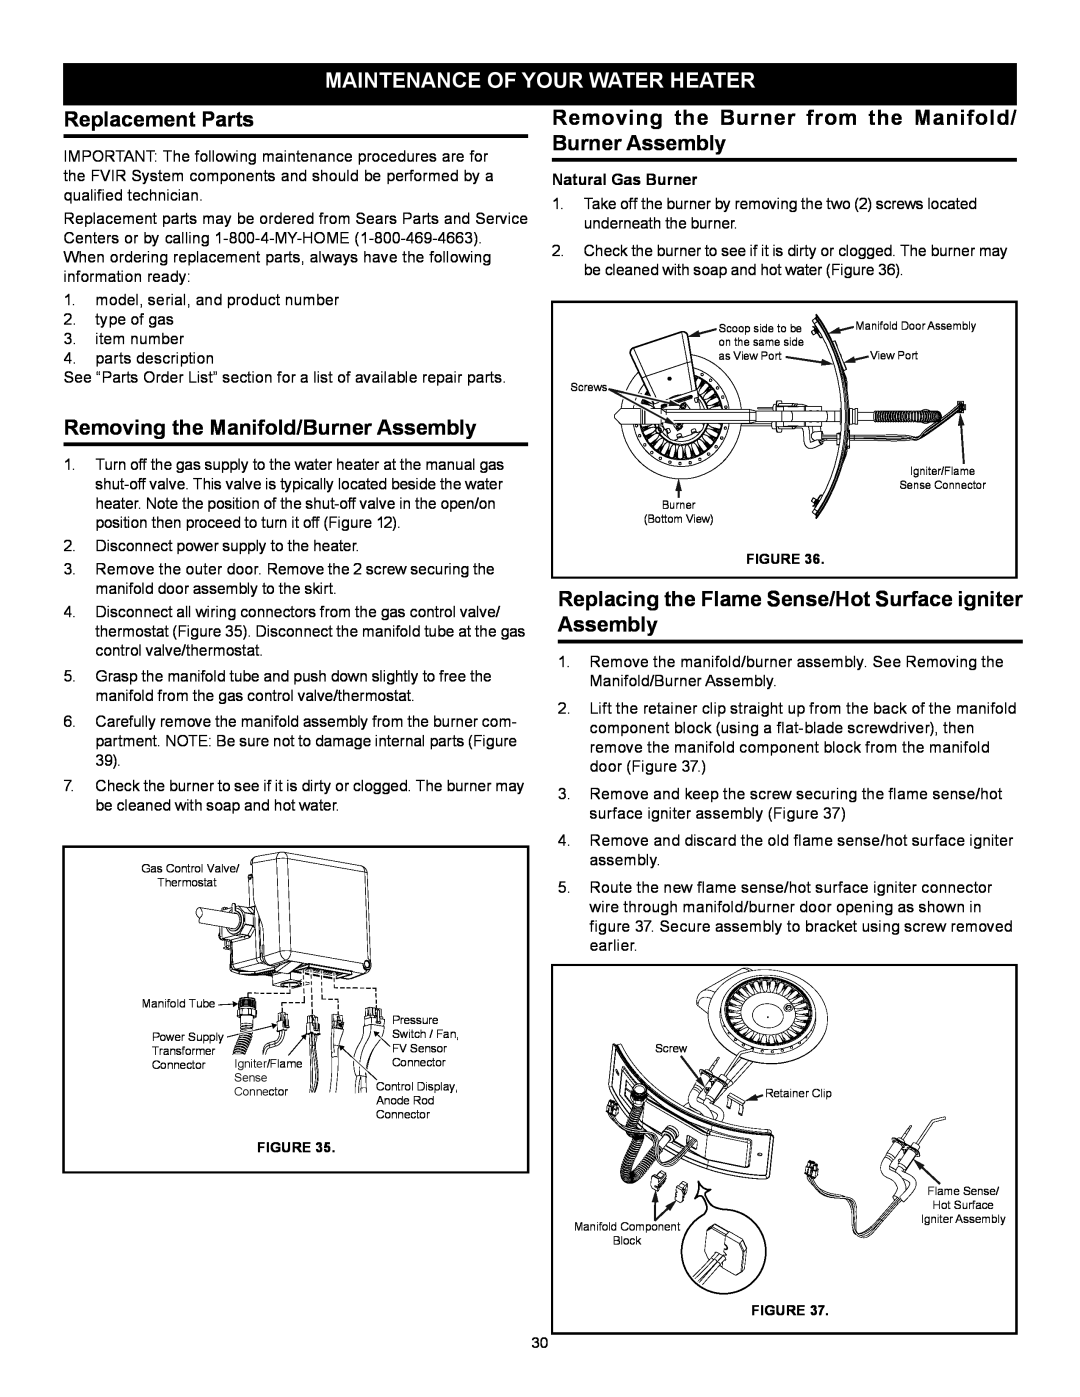 Kenmore 153.33264, 153.33262 Maintenance Of Your Water Heater, Replacement Parts, Removing the Manifold/Burner Assembly 